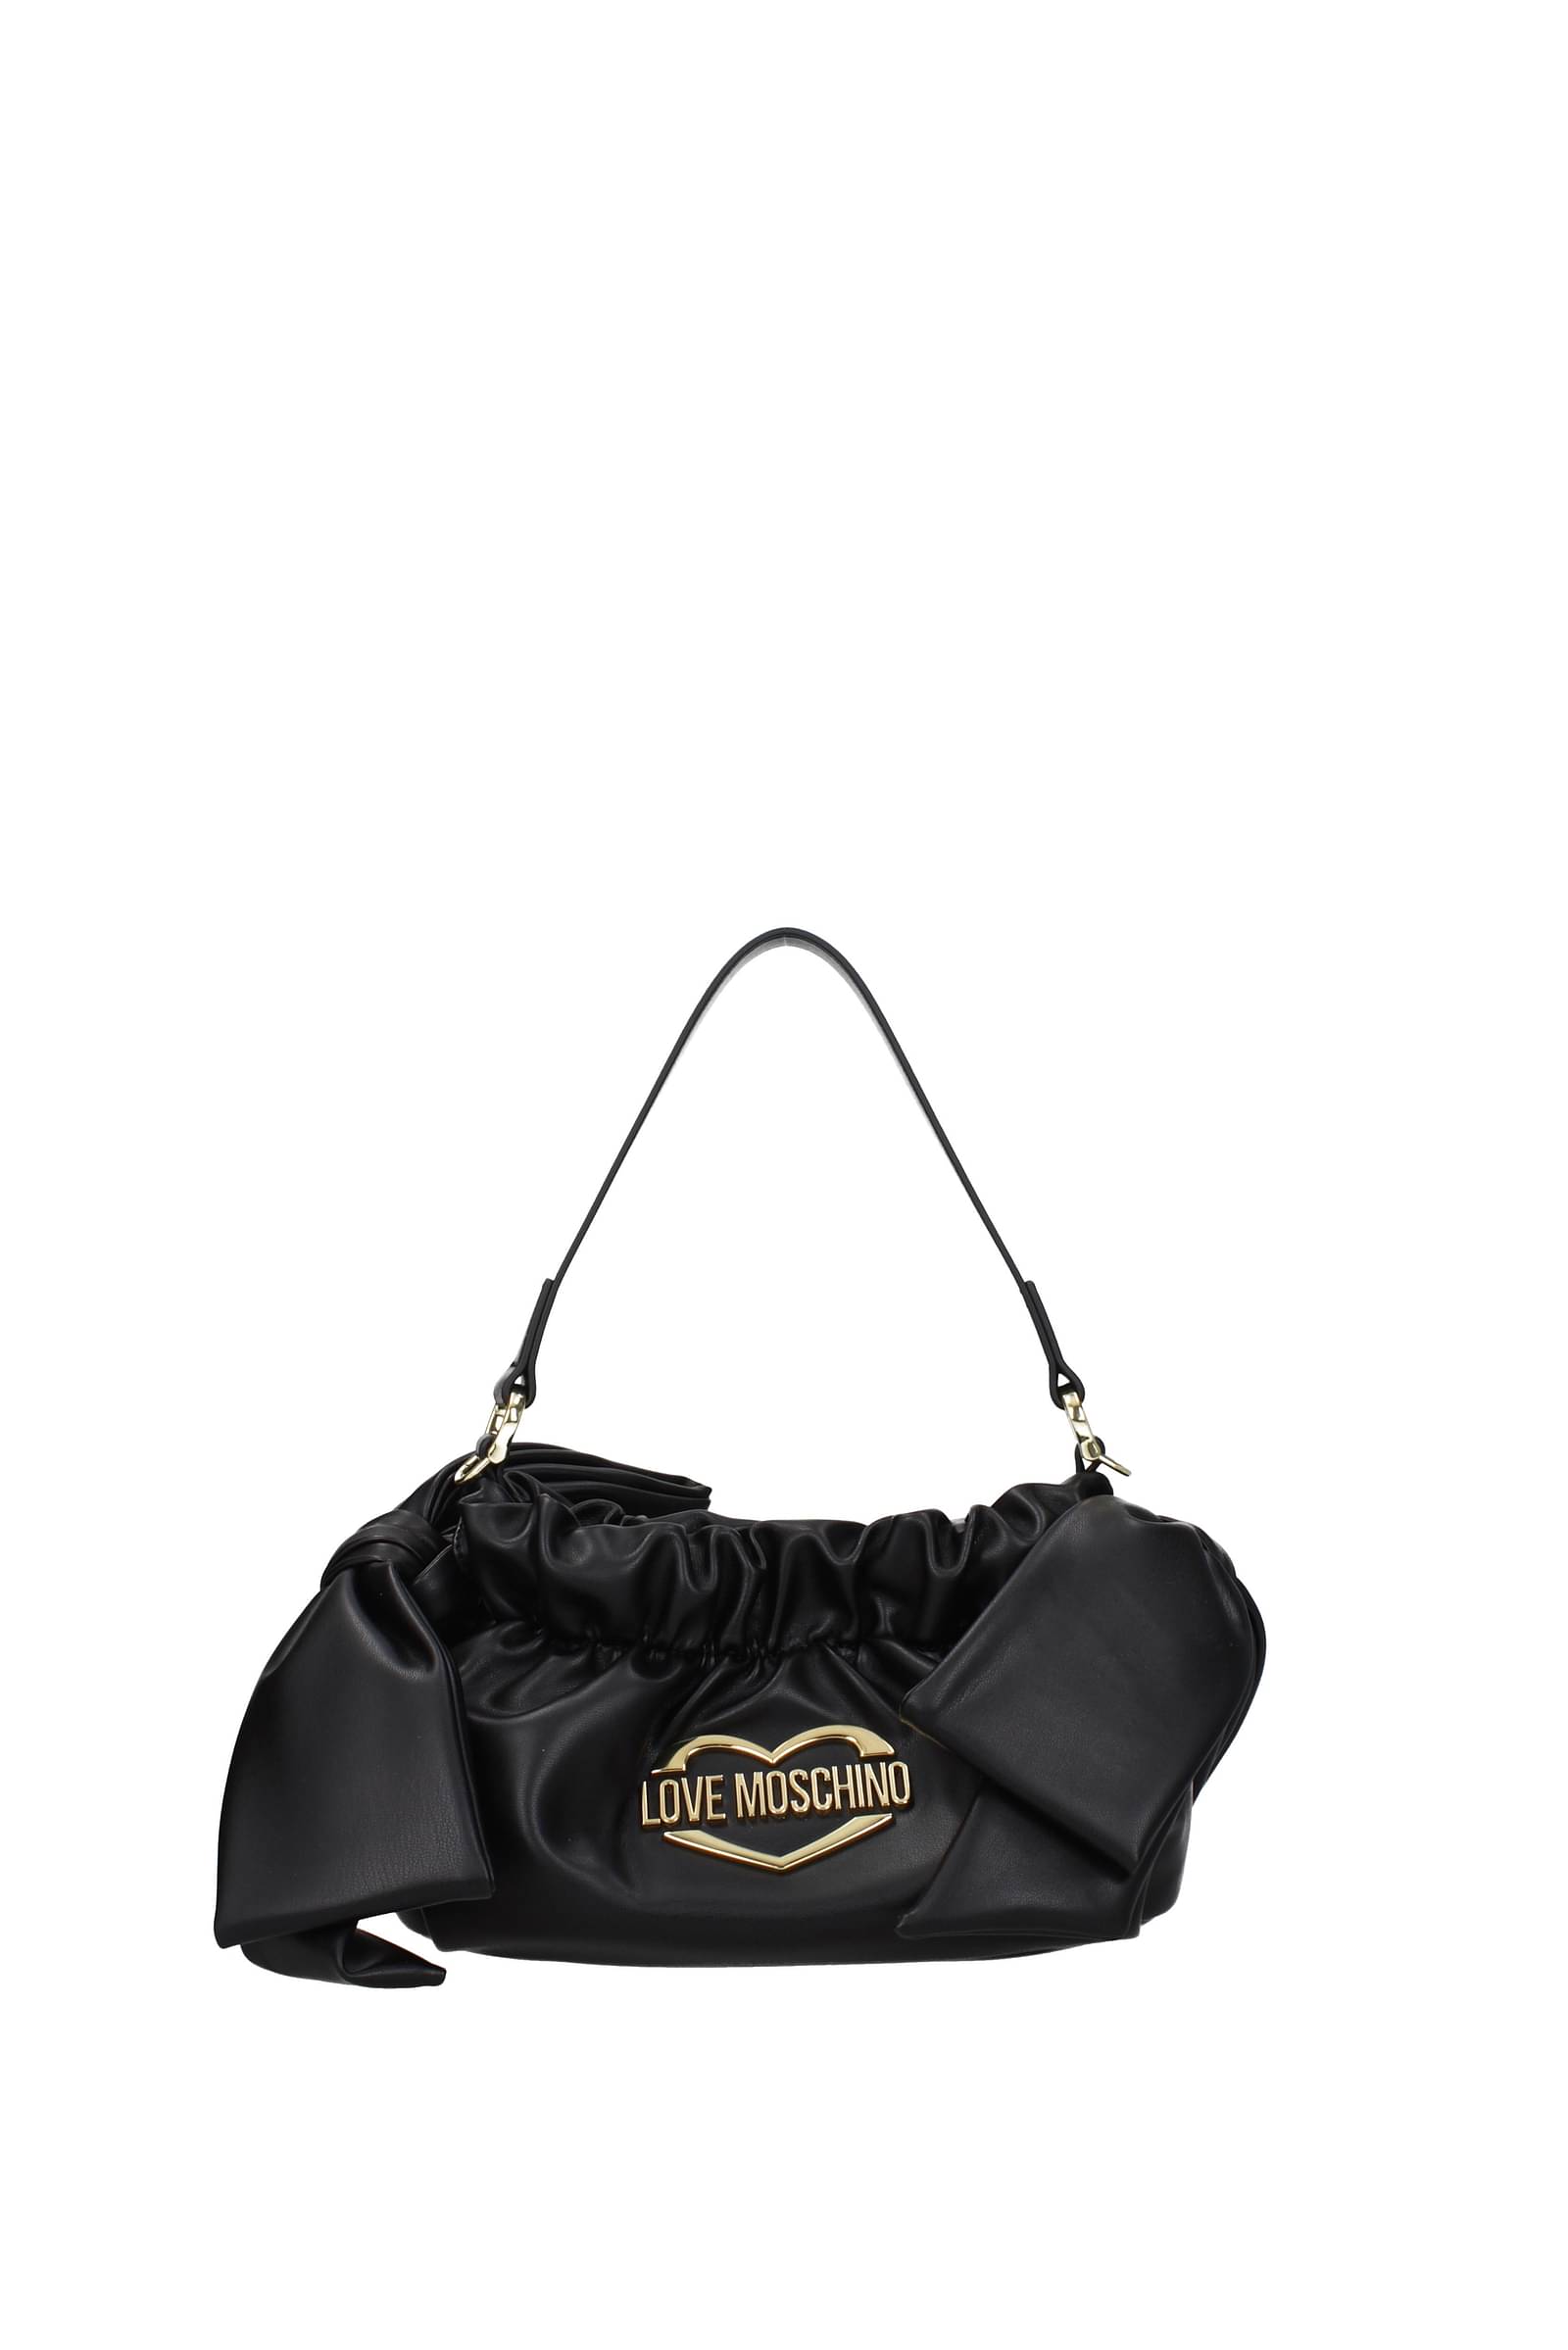 Love Moschino Handbags, Shoes, Wallets & Small Leather Goods